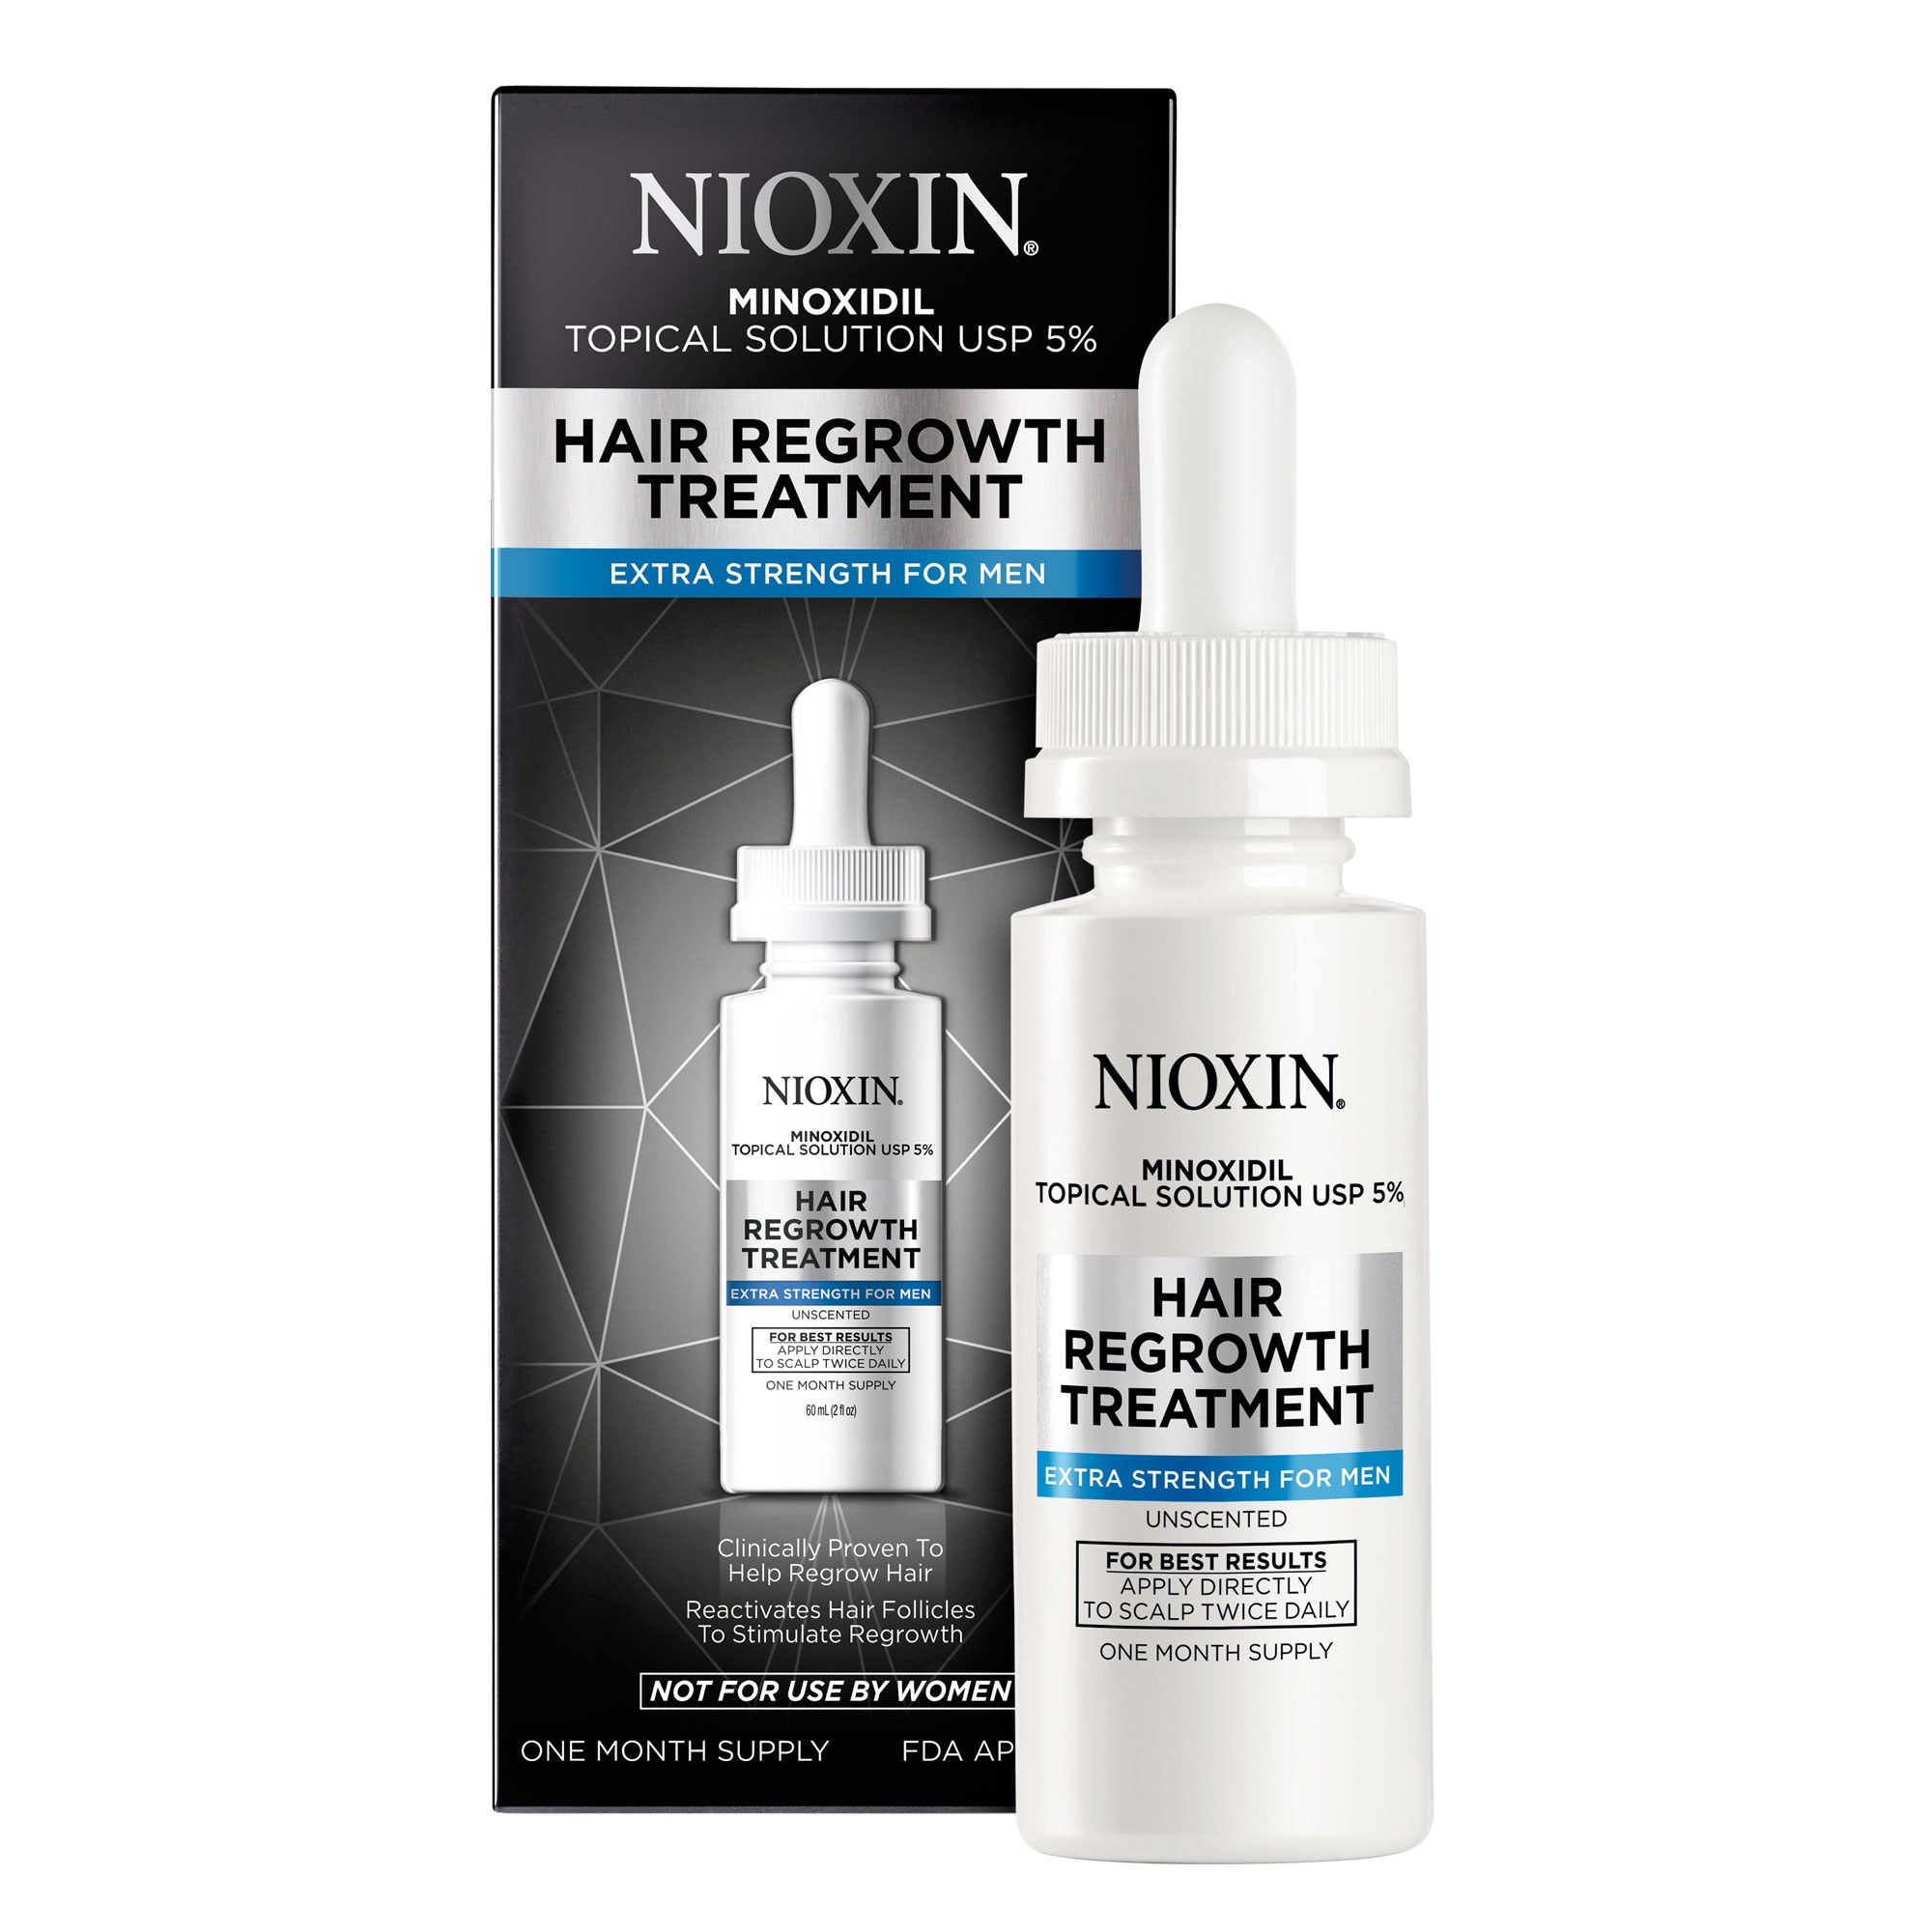 Nioxin Products | Nioxin Supplier and Distributor Hair Regrowth Treatment  for Men 5% - 90 Day - 3 pk | Ethos Beauty Partners